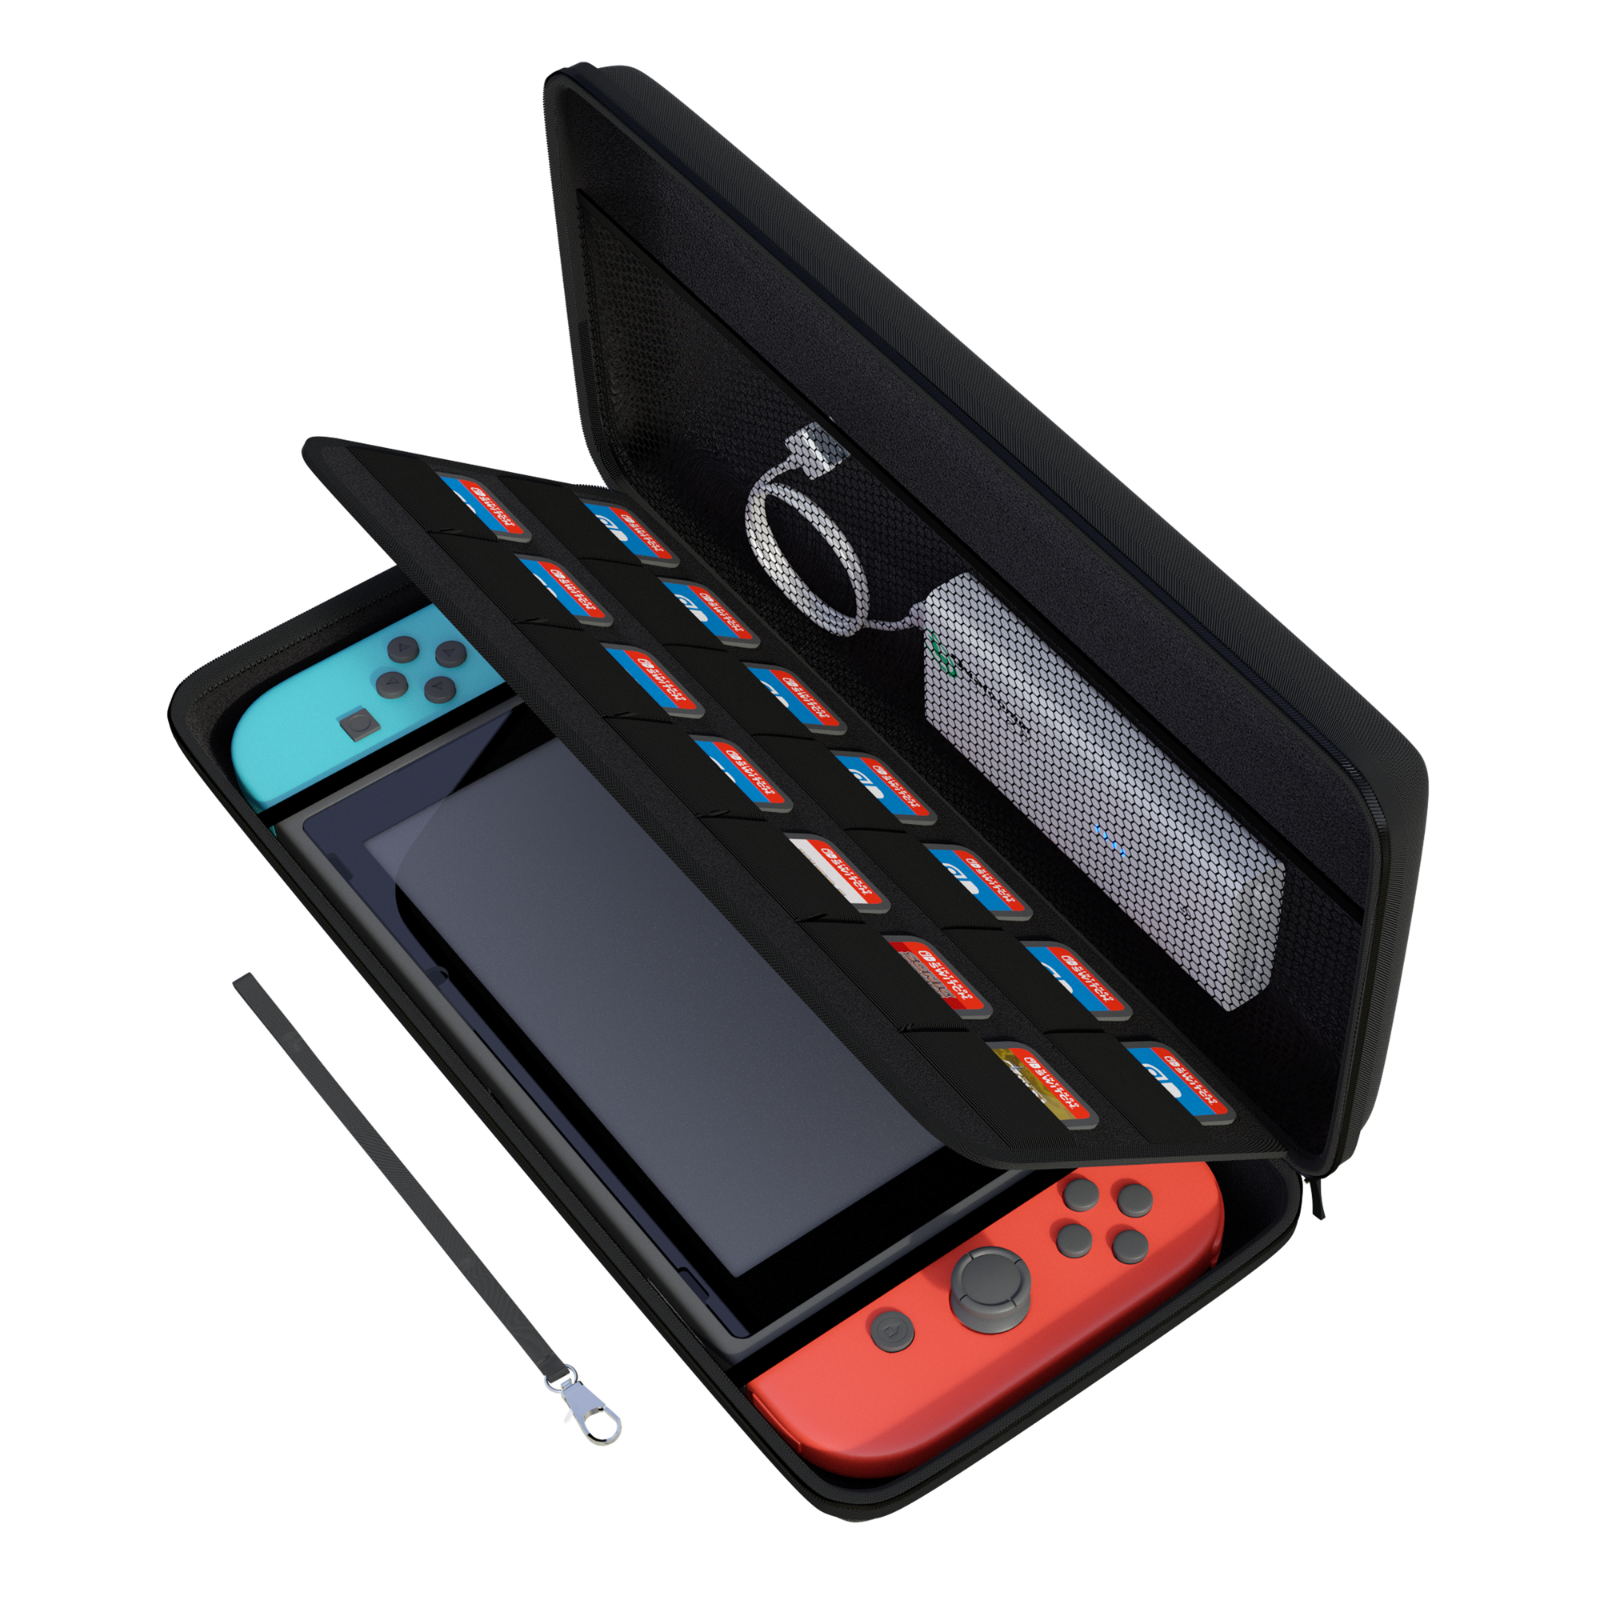 Nintendo Switch Hard Carrying Case/cover With 14 Cartridge Holders (black)